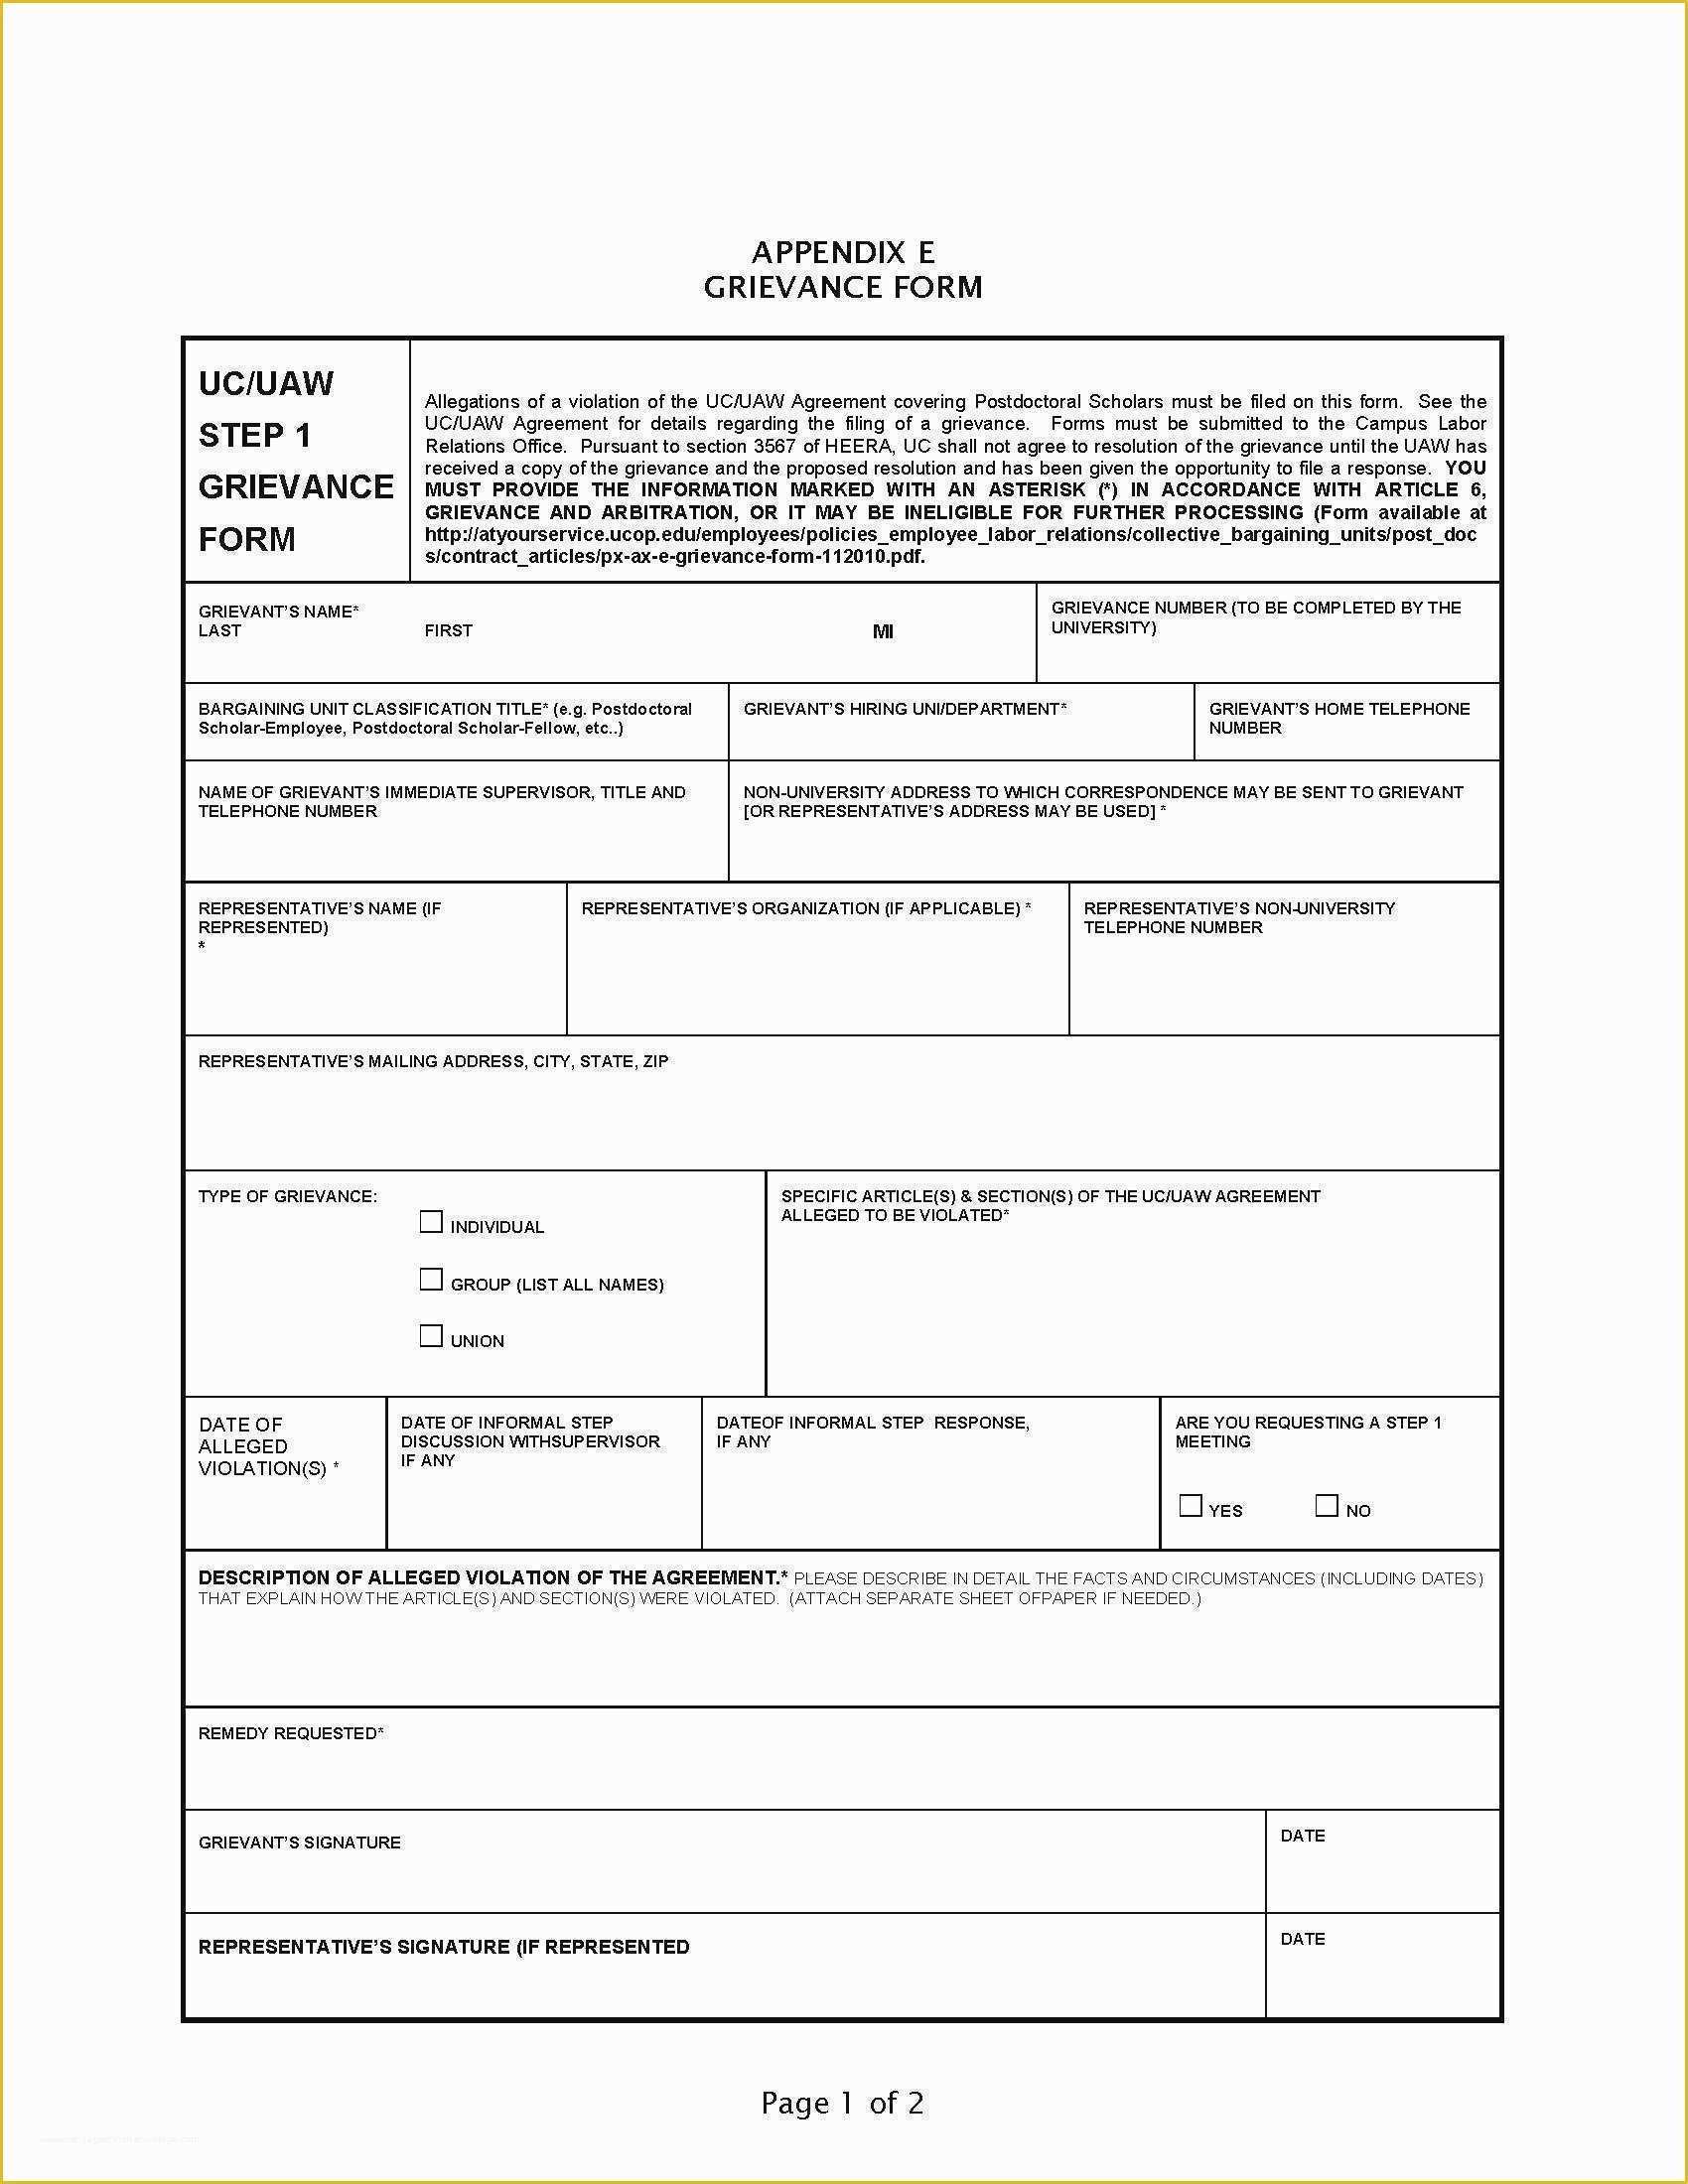 Free Employee Earnings Statement Template Of Free Employee Earnings Statement Template New Jack and